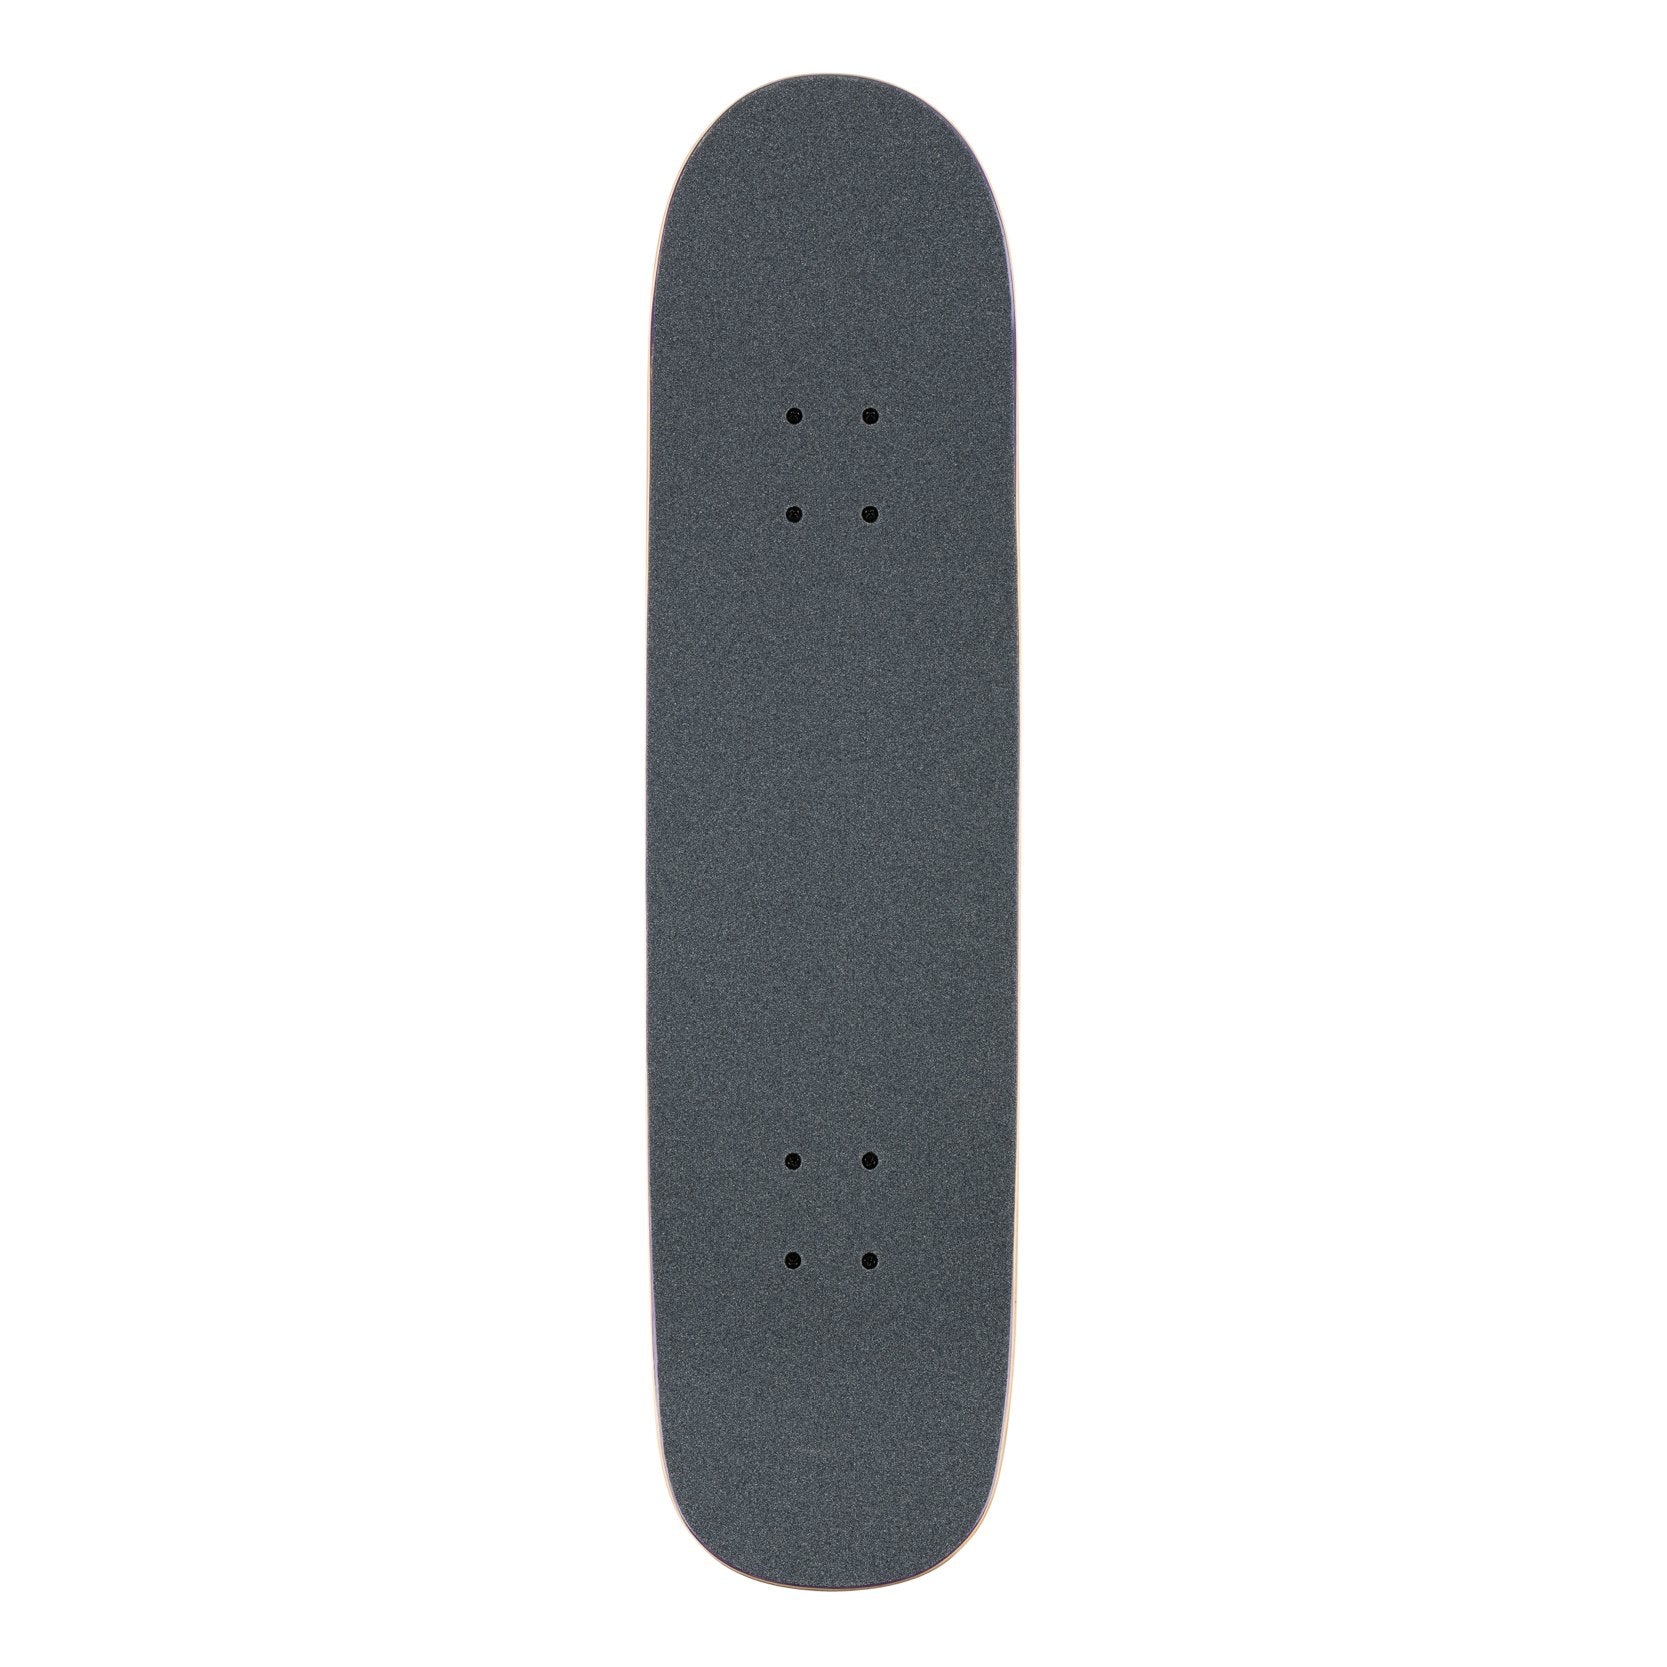 WELCOME COMPLETE - BACTOCAT BLACK (8") - The Drive Skateshop